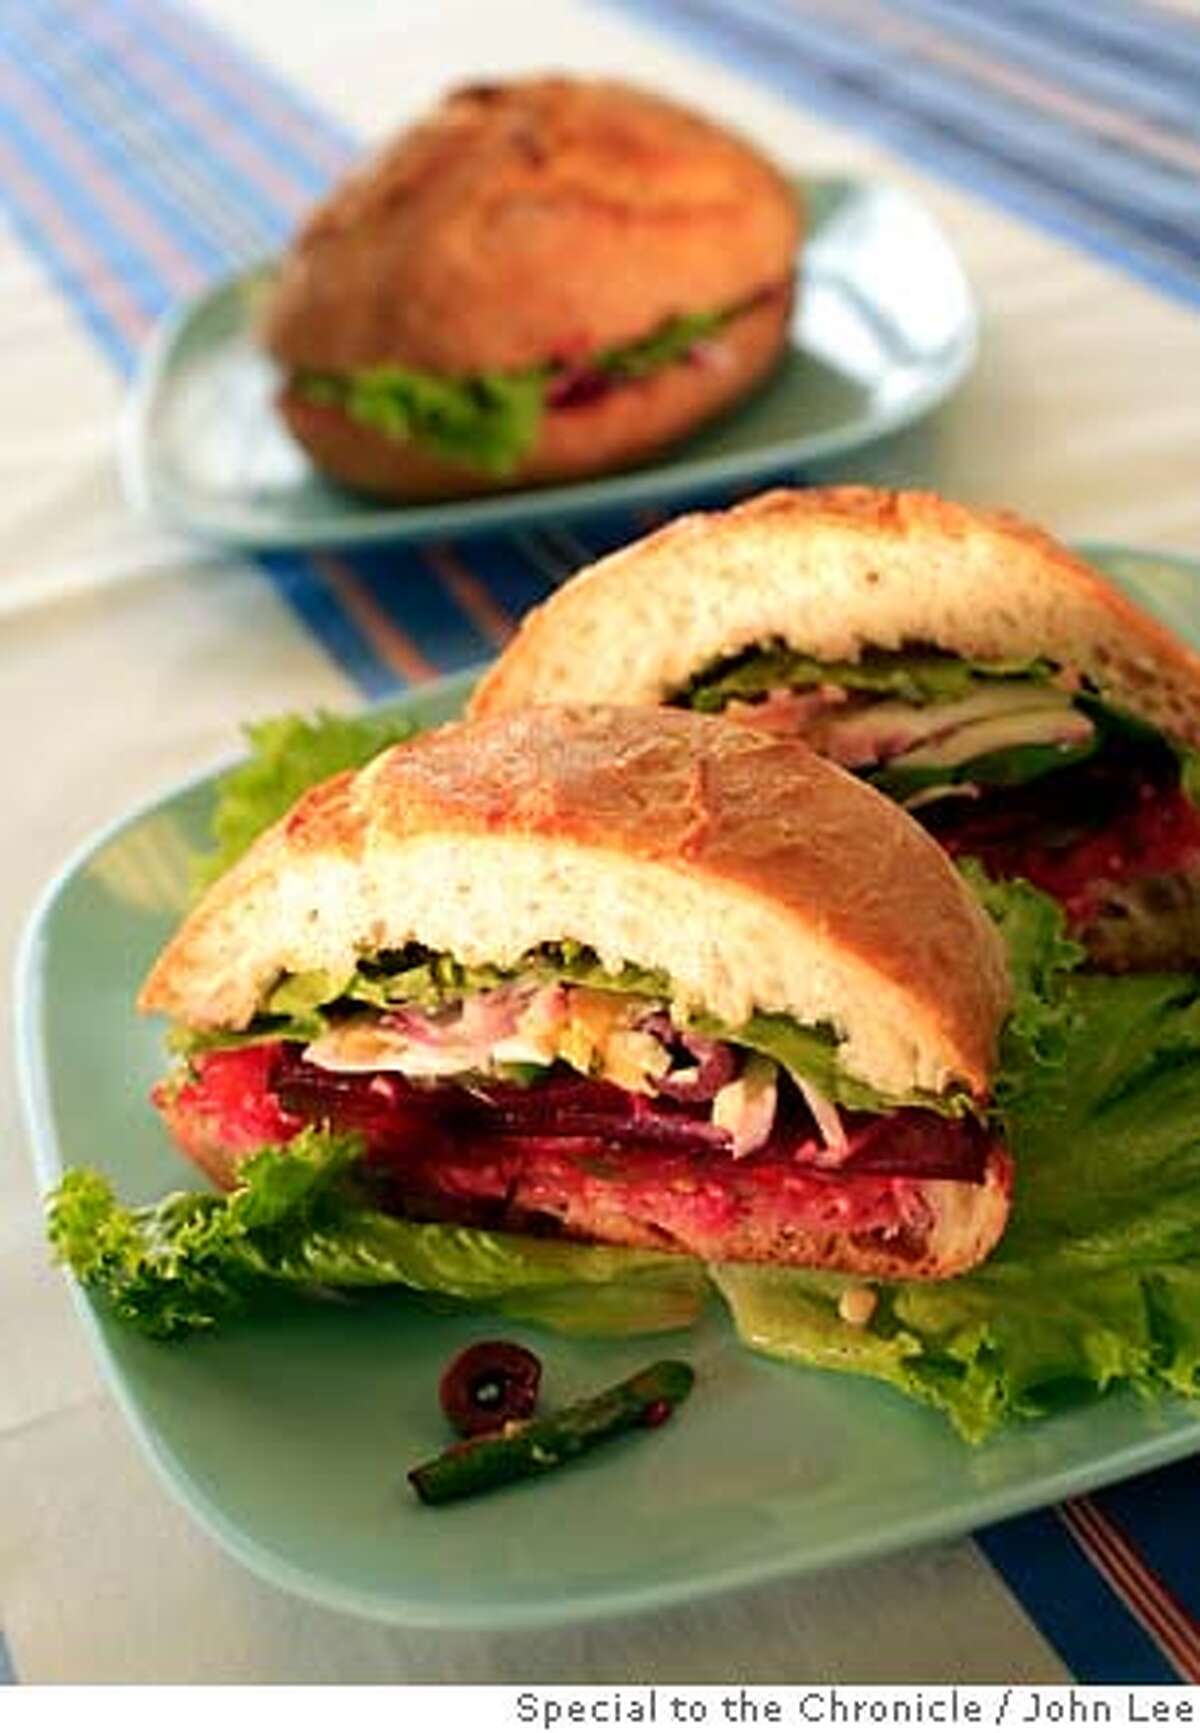 PICNIC23_RECIPES_05_JOHNLEE.JPG Pan Bagnat. By JOHN LEE/SPECIAL TO THE CHRONICLE